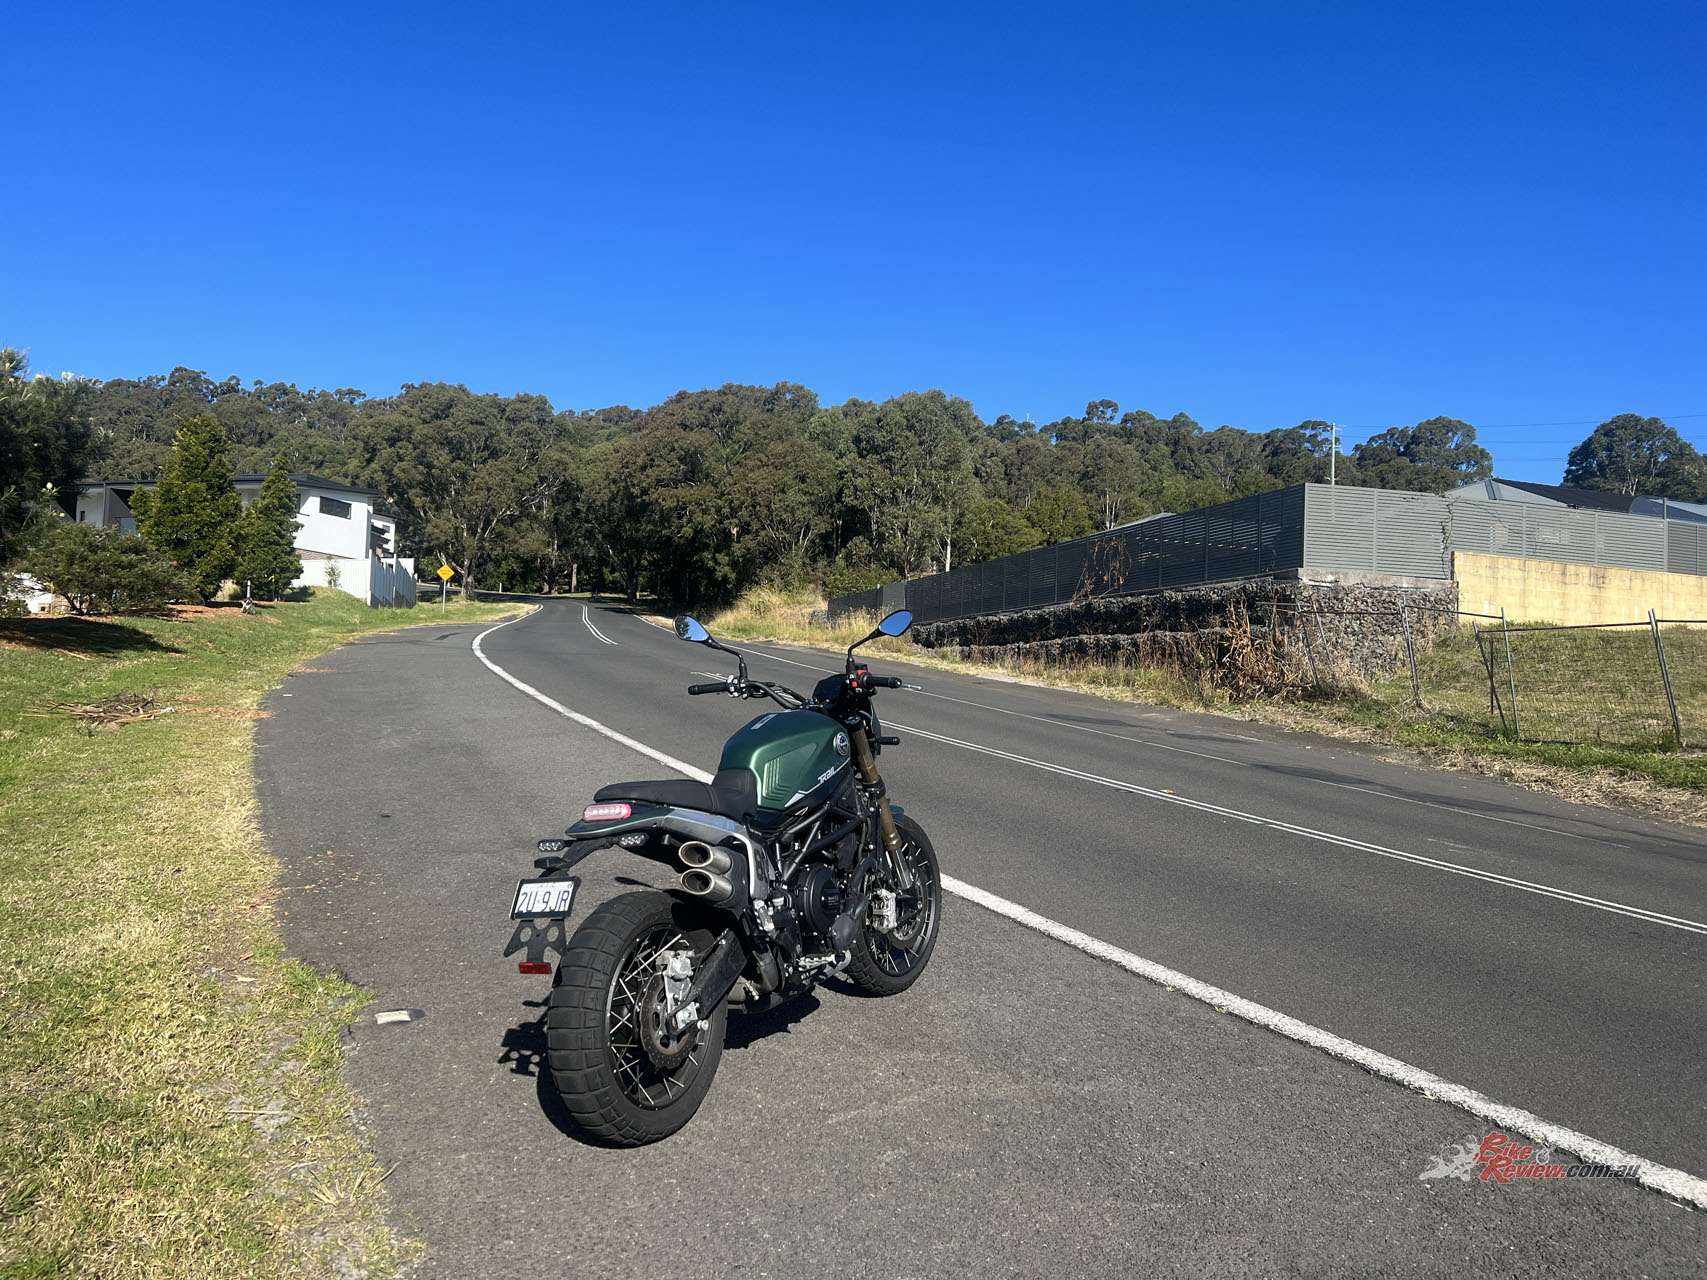 Jamberoo Road features an 80km/h speed limit, which means it's one of the faster sections in the Illawarra.